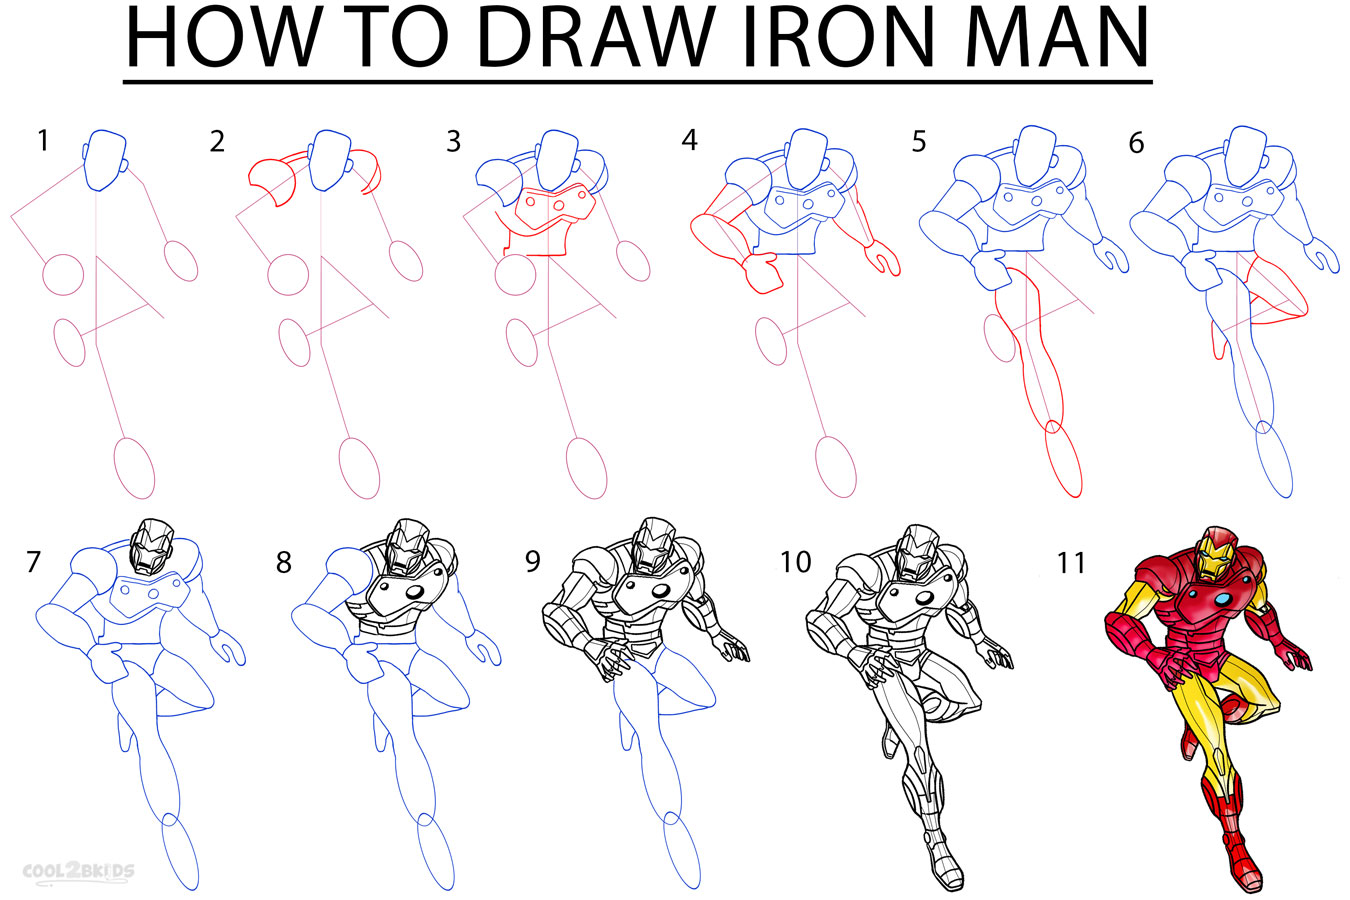 Simple How To Draw Iron Man Pencil Sketch for Adult